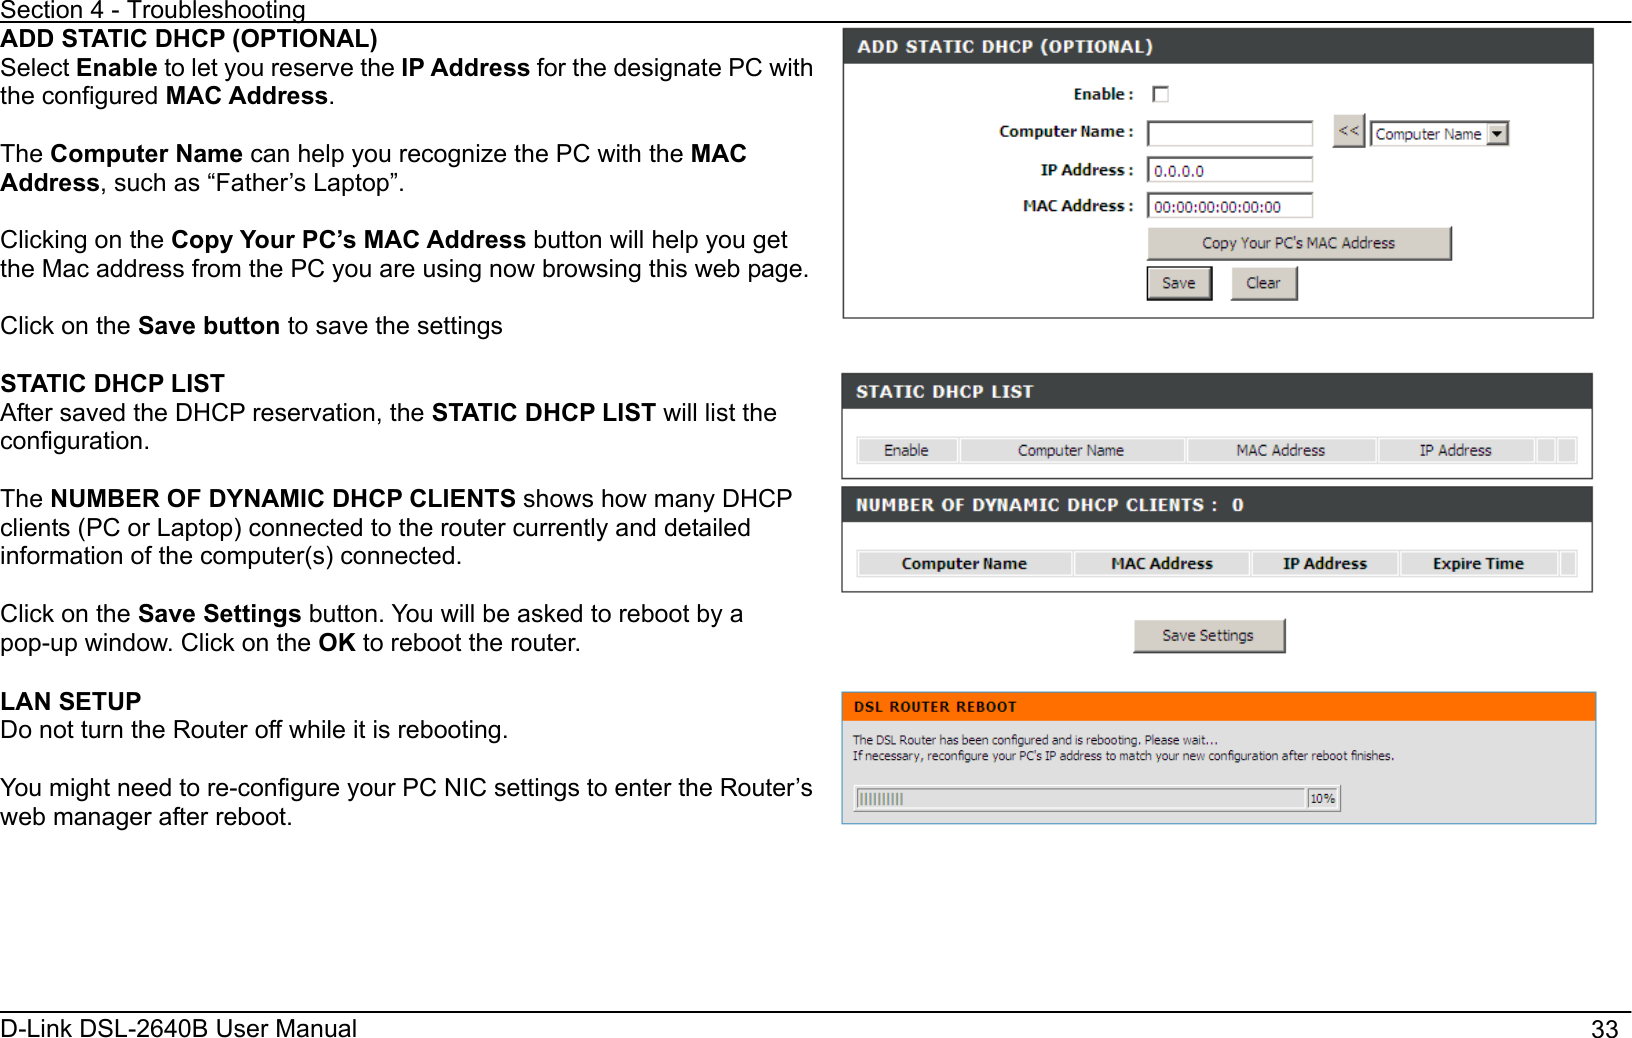 Section 4 - Troubleshooting D-Link DSL-2640B User Manual                                       33ADD STATIC DHCP (OPTIONAL) Select Enable to let you reserve the IP Address for the designate PC with the configured MAC Address.The Computer Name can help you recognize the PC with the MACAddress, such as “Father’s Laptop”. Clicking on the Copy Your PC’s MAC Address button will help you get the Mac address from the PC you are using now browsing this web page.Click on the Save button to save the settings STATIC DHCP LIST After saved the DHCP reservation, the STATIC DHCP LIST will list the configuration.The NUMBER OF DYNAMIC DHCP CLIENTS shows how many DHCP clients (PC or Laptop) connected to the router currently and detailed information of the computer(s) connected. Click on the Save Settings button. You will be asked to reboot by a pop-up window. Click on the OK to reboot the router.LAN SETUP Do not turn the Router off while it is rebooting. You might need to re-configure your PC NIC settings to enter the Router’s web manager after reboot. 